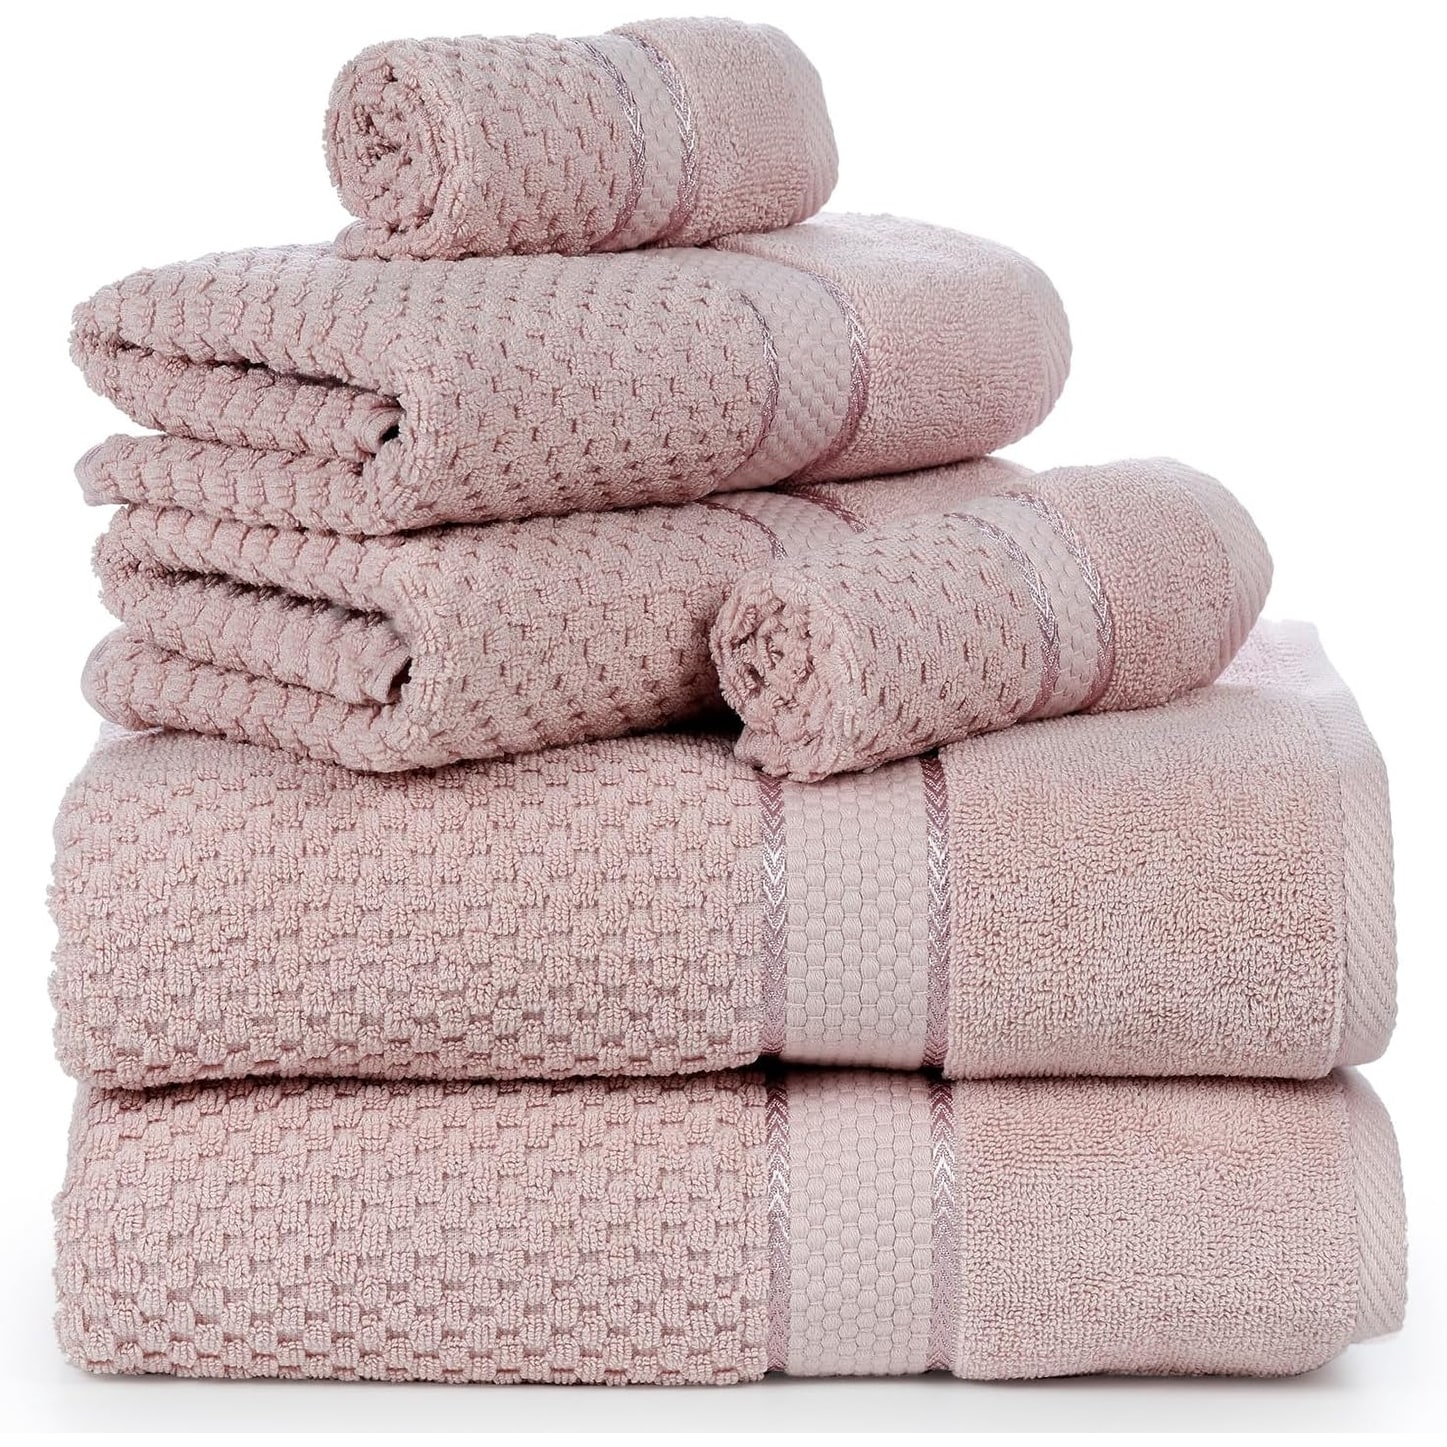 https://ak1.ostkcdn.com/images/products/is/images/direct/a028cee3d29350599e36bb2a29db6b9214037e96/Cotton-Popcorn-Textured-6-Piece-Towel-Set-by-Ample-Decor.jpg